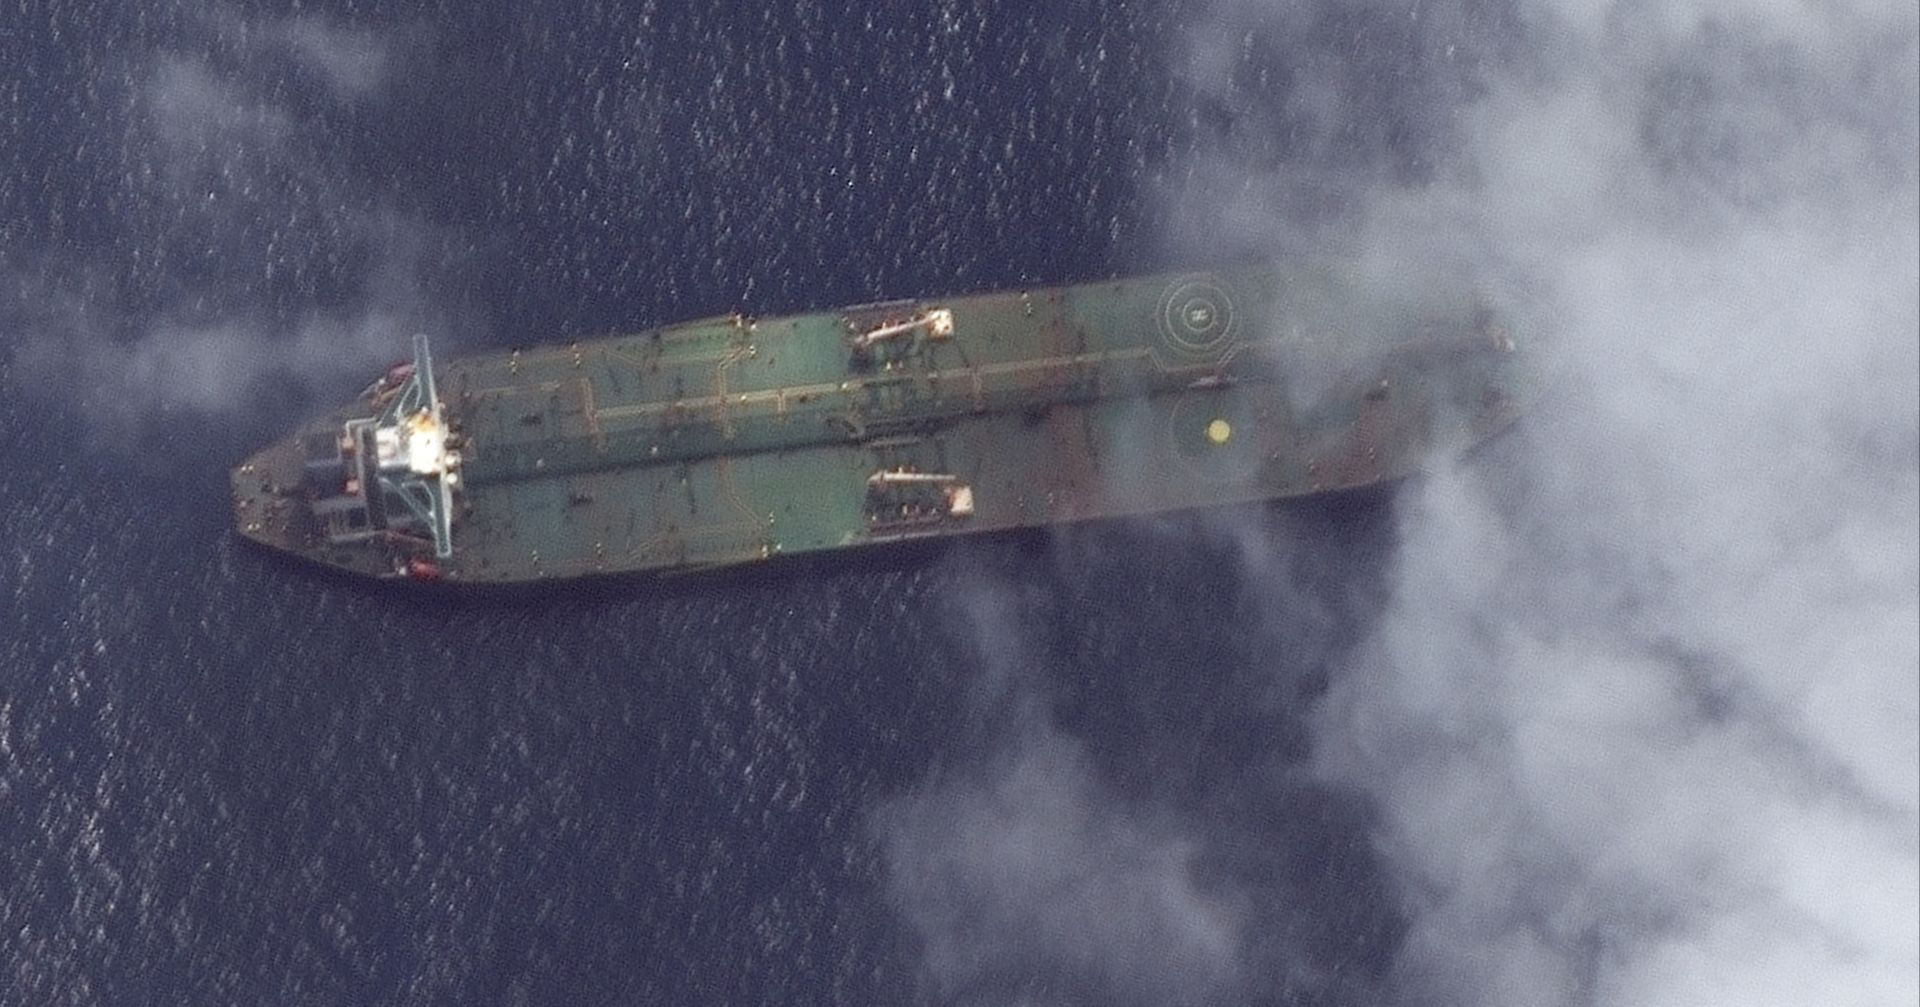 epa07826189 A satellite photo made available by MAXAR Technologies on 07 September 2019 shows a satellite image of the Adrian Darya-1 oil tanker off the coast of Tartus, Syria, 06 September 2019. The Iranian oil tanker 'Adrian Darya 1', loaded with some 2.1 million barrels of oil and formerly know as the 'Grace 1', was seized by Gibraltar authorities on 04 July on  suspicion of delivering Iranian oil to Syrian Banyas refinery in violation of EU sanctions.  EPA/SATELLITE IMAGE ©2019 MAXAR TECHNOLOGIES / HANDOUT (Satellite image © 2018 DigitalGlobe, a Maxar company) HANDOUT EDITORIAL USE ONLY/NO SALES